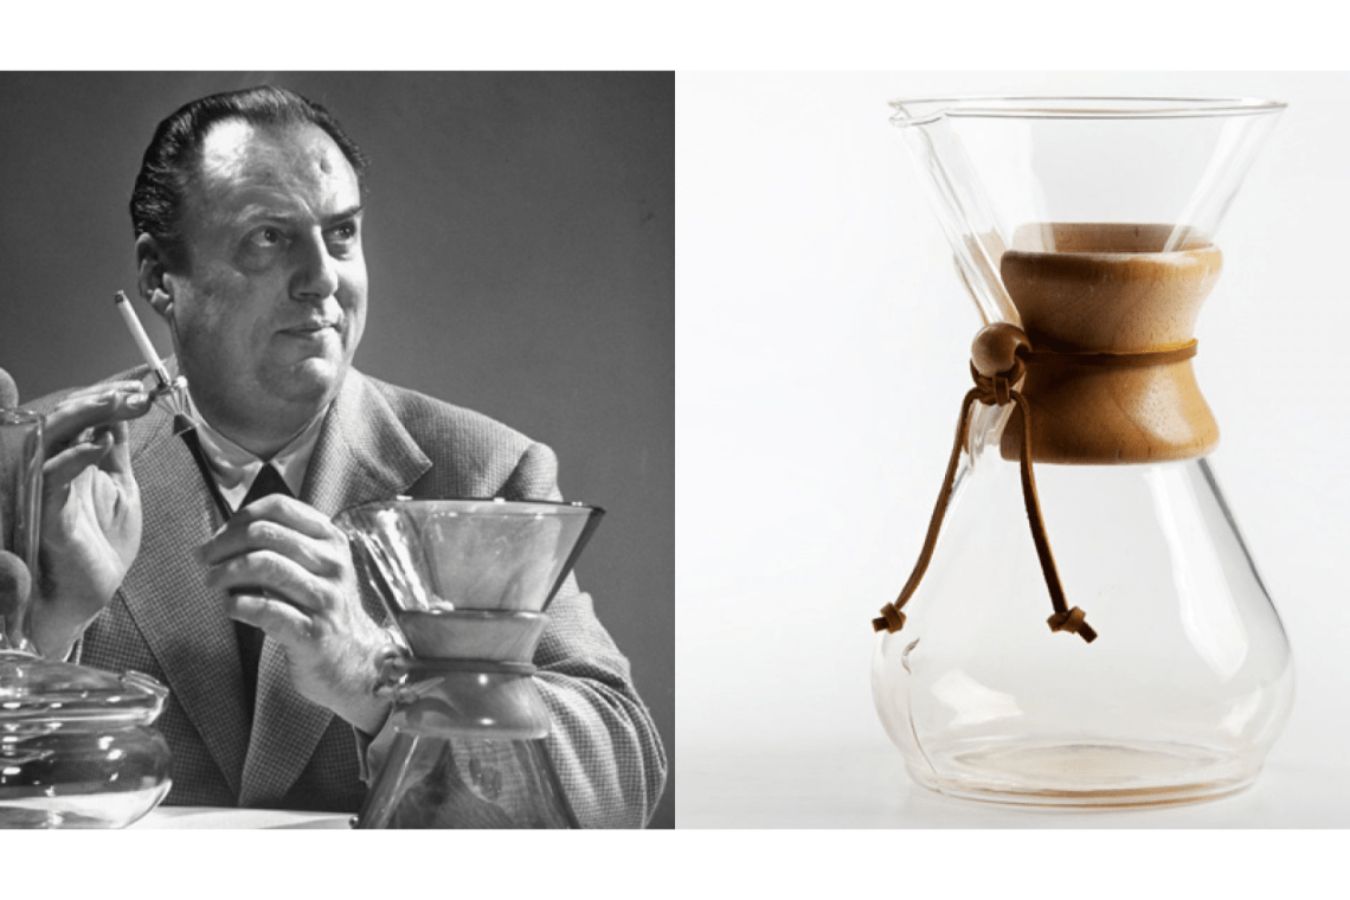 The Iconic Status The Era of Chemex in Brewing Coffee (2)